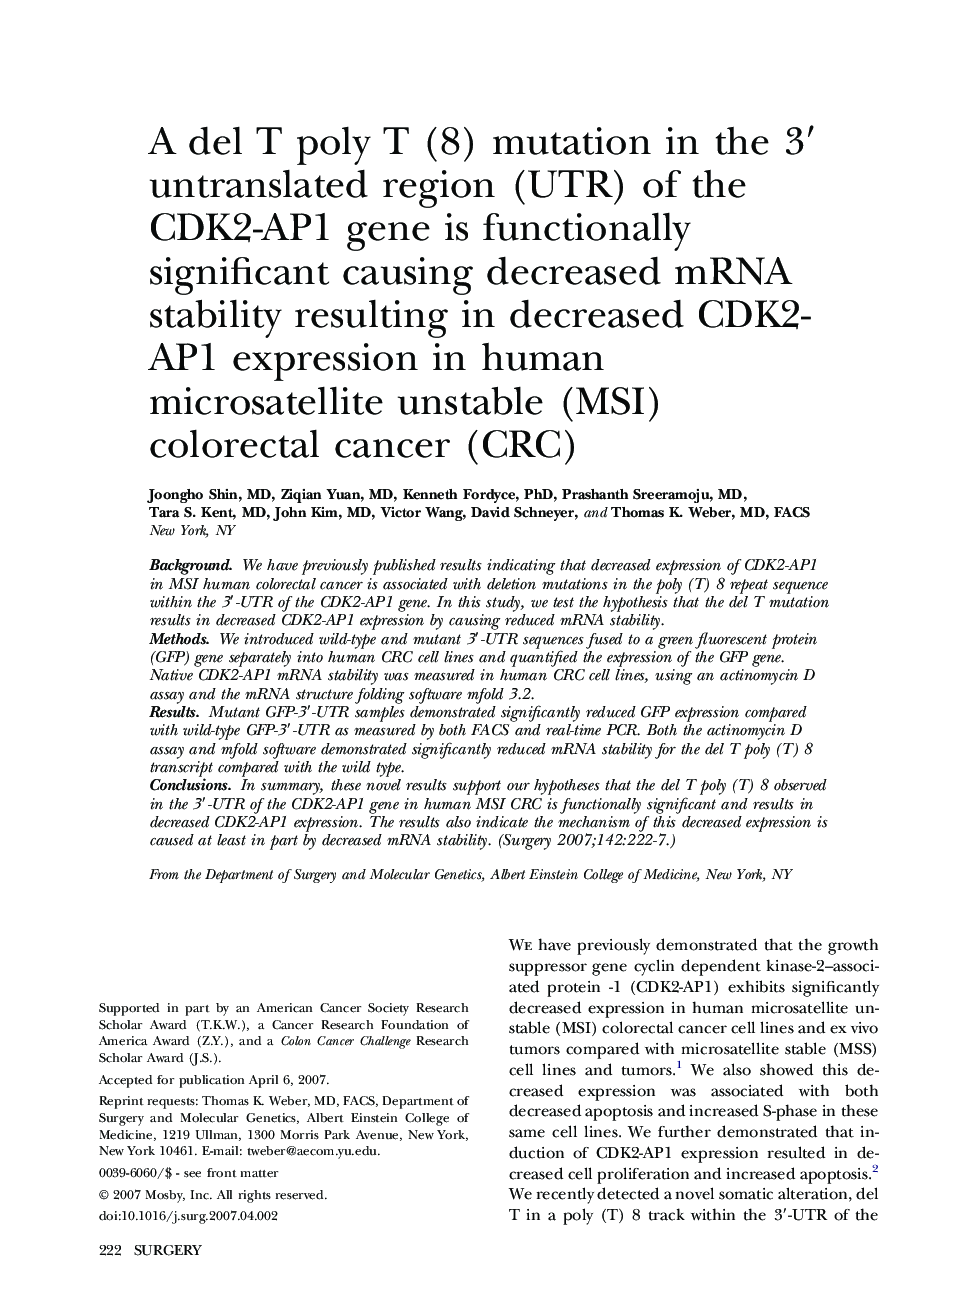 A del T poly T (8) mutation in the 3′ untranslated region (UTR) of the CDK2-AP1 gene is functionally significant causing decreased mRNA stability resulting in decreased CDK2-AP1 expression in human microsatellite unstable (MSI) colorectal cancer (CRC) 